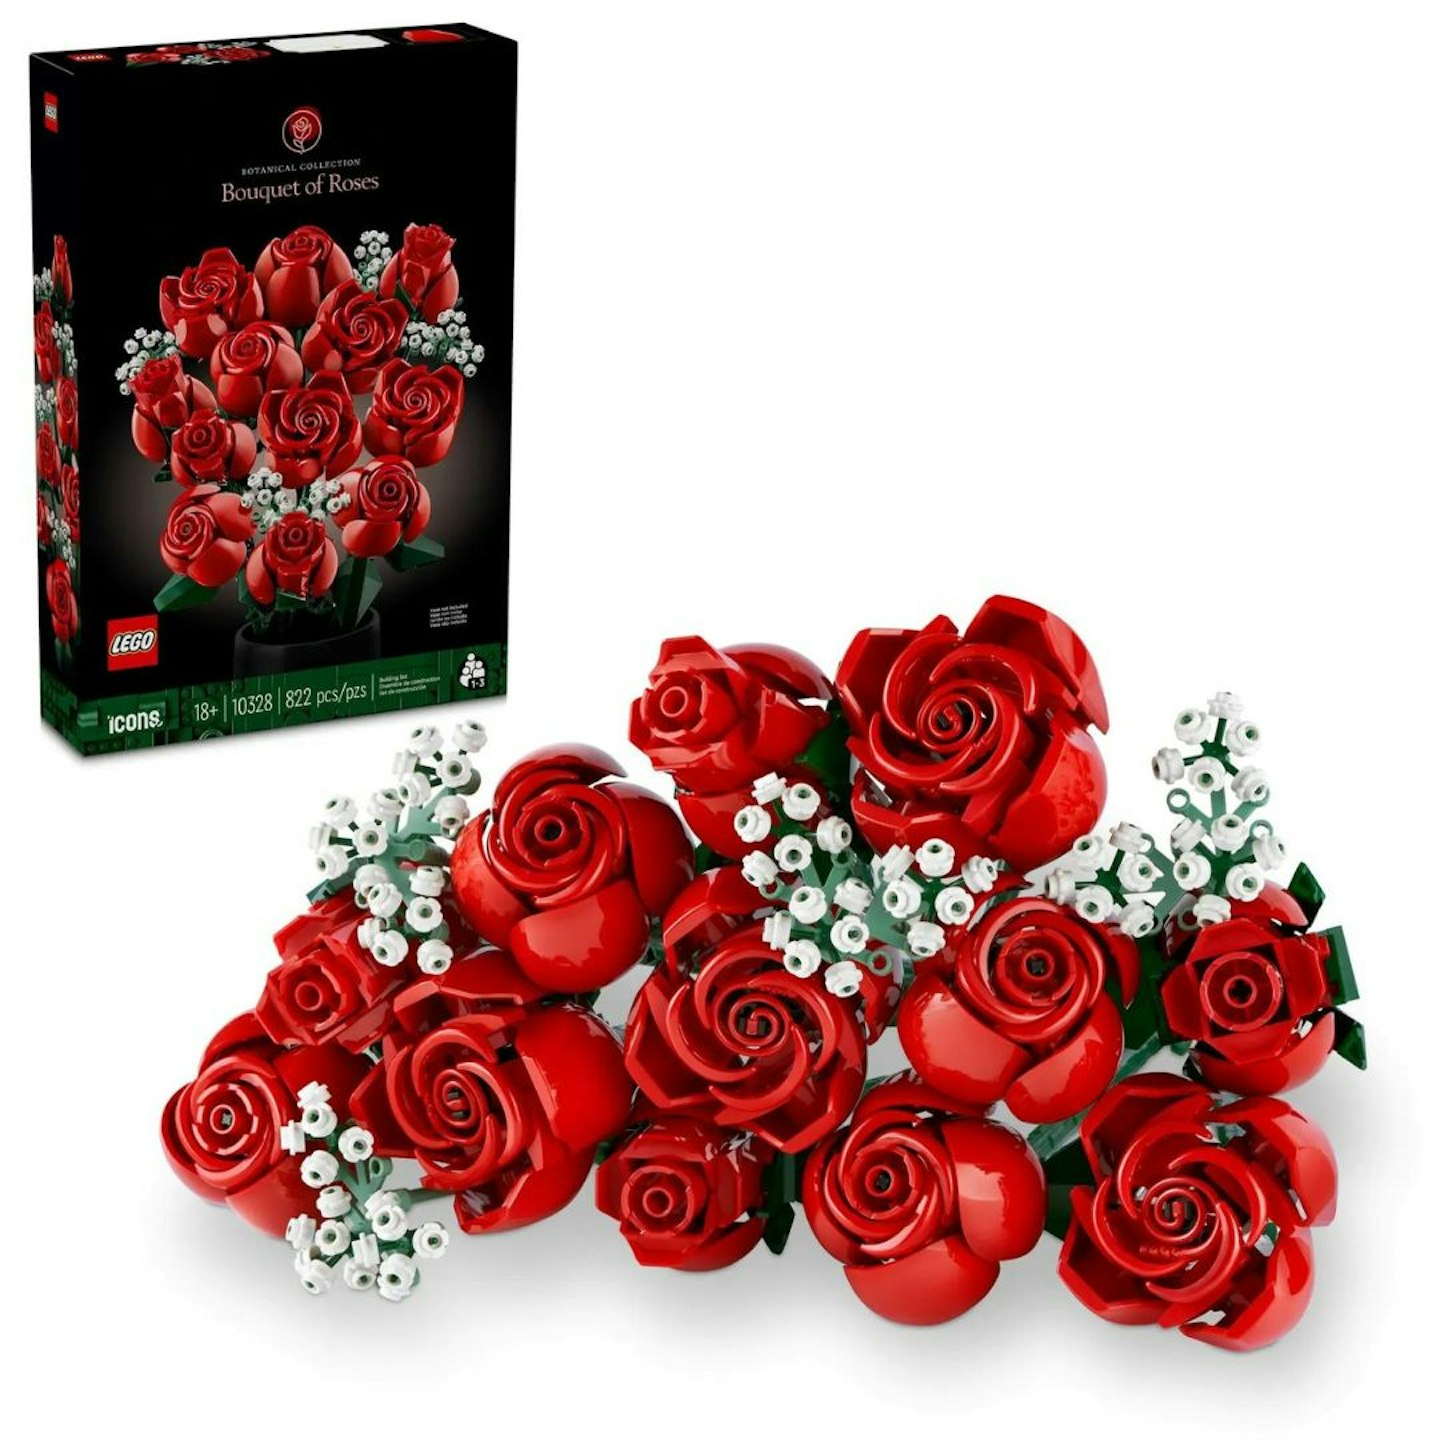 The best LEGO sets for adults: Bouquet of Roses